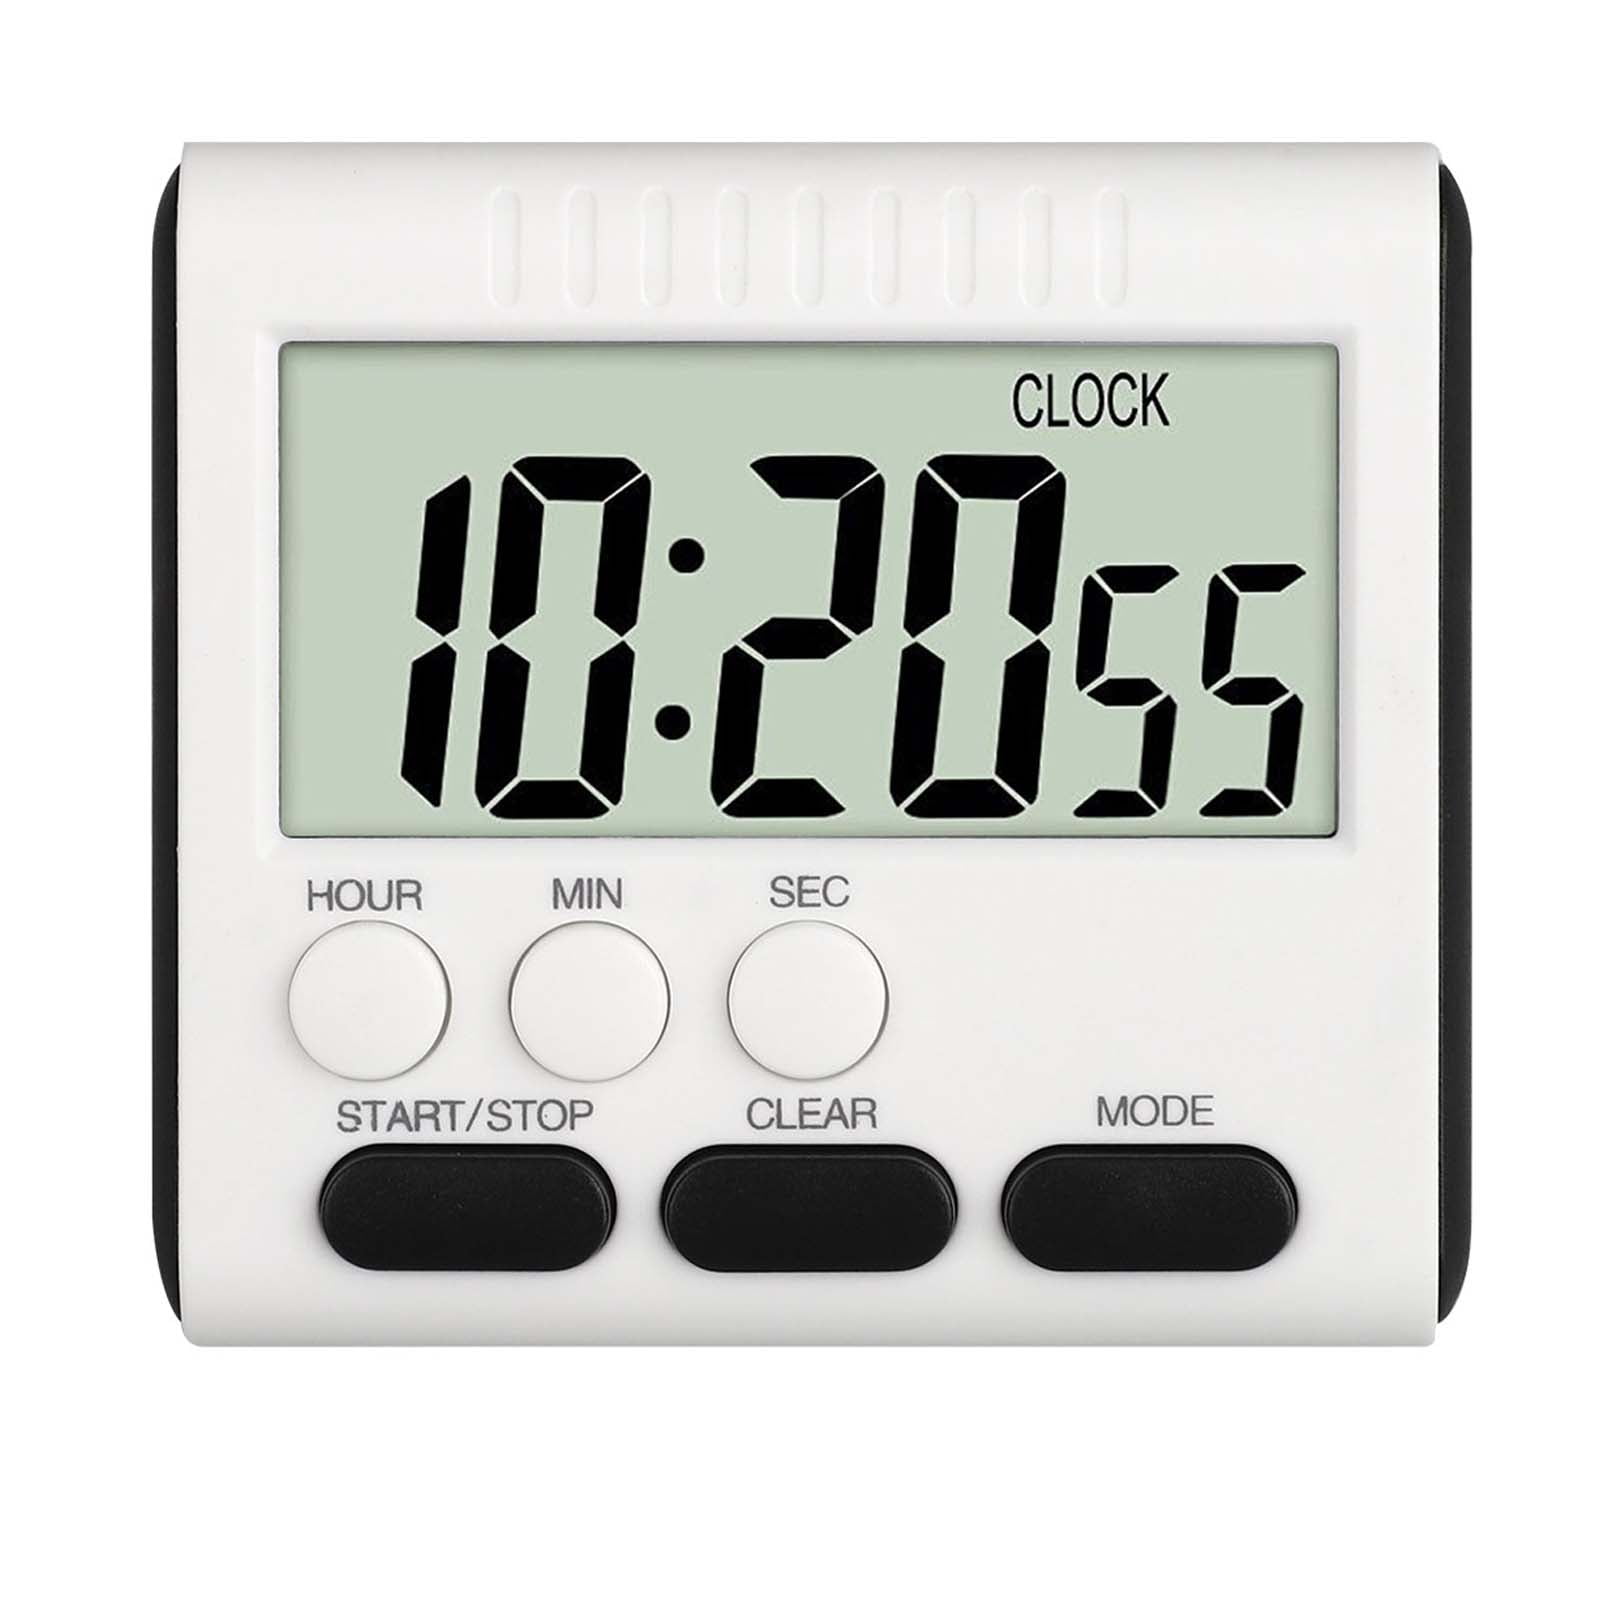 Cooking With Large LCD Display XREXS 4 Channels Digital Kitchen Timer Clock Up 